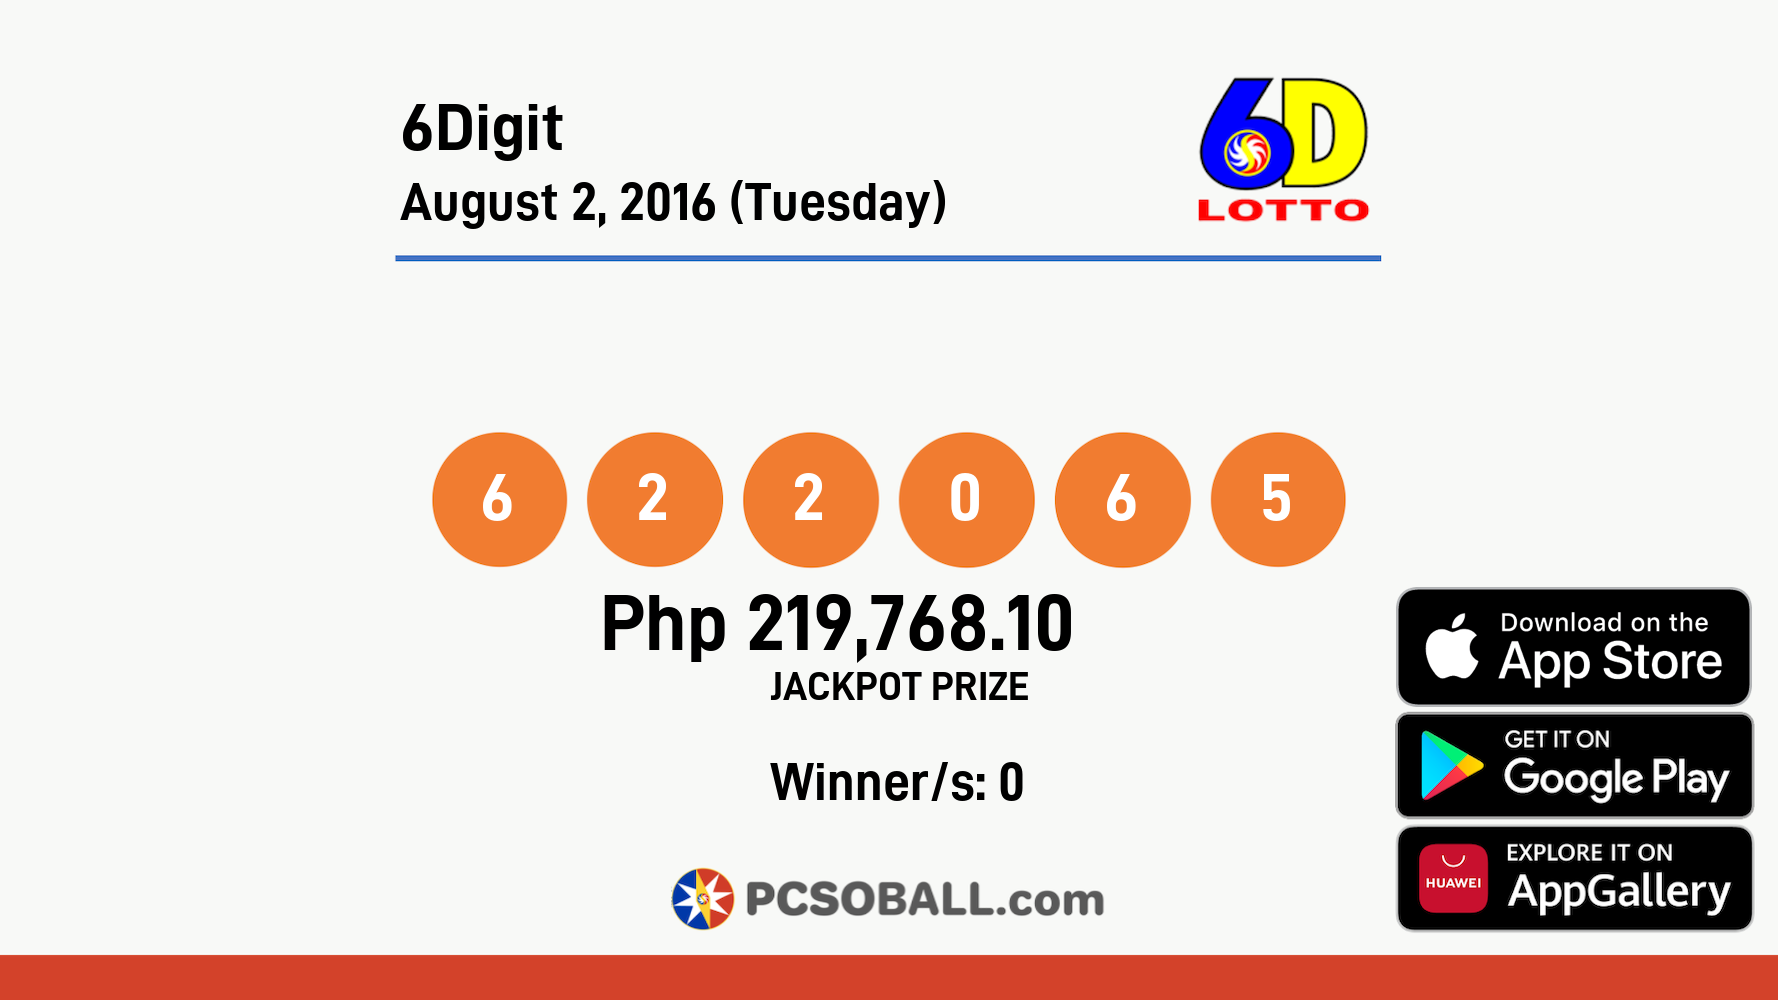 6Digit August 2, 2016 (Tuesday) Result